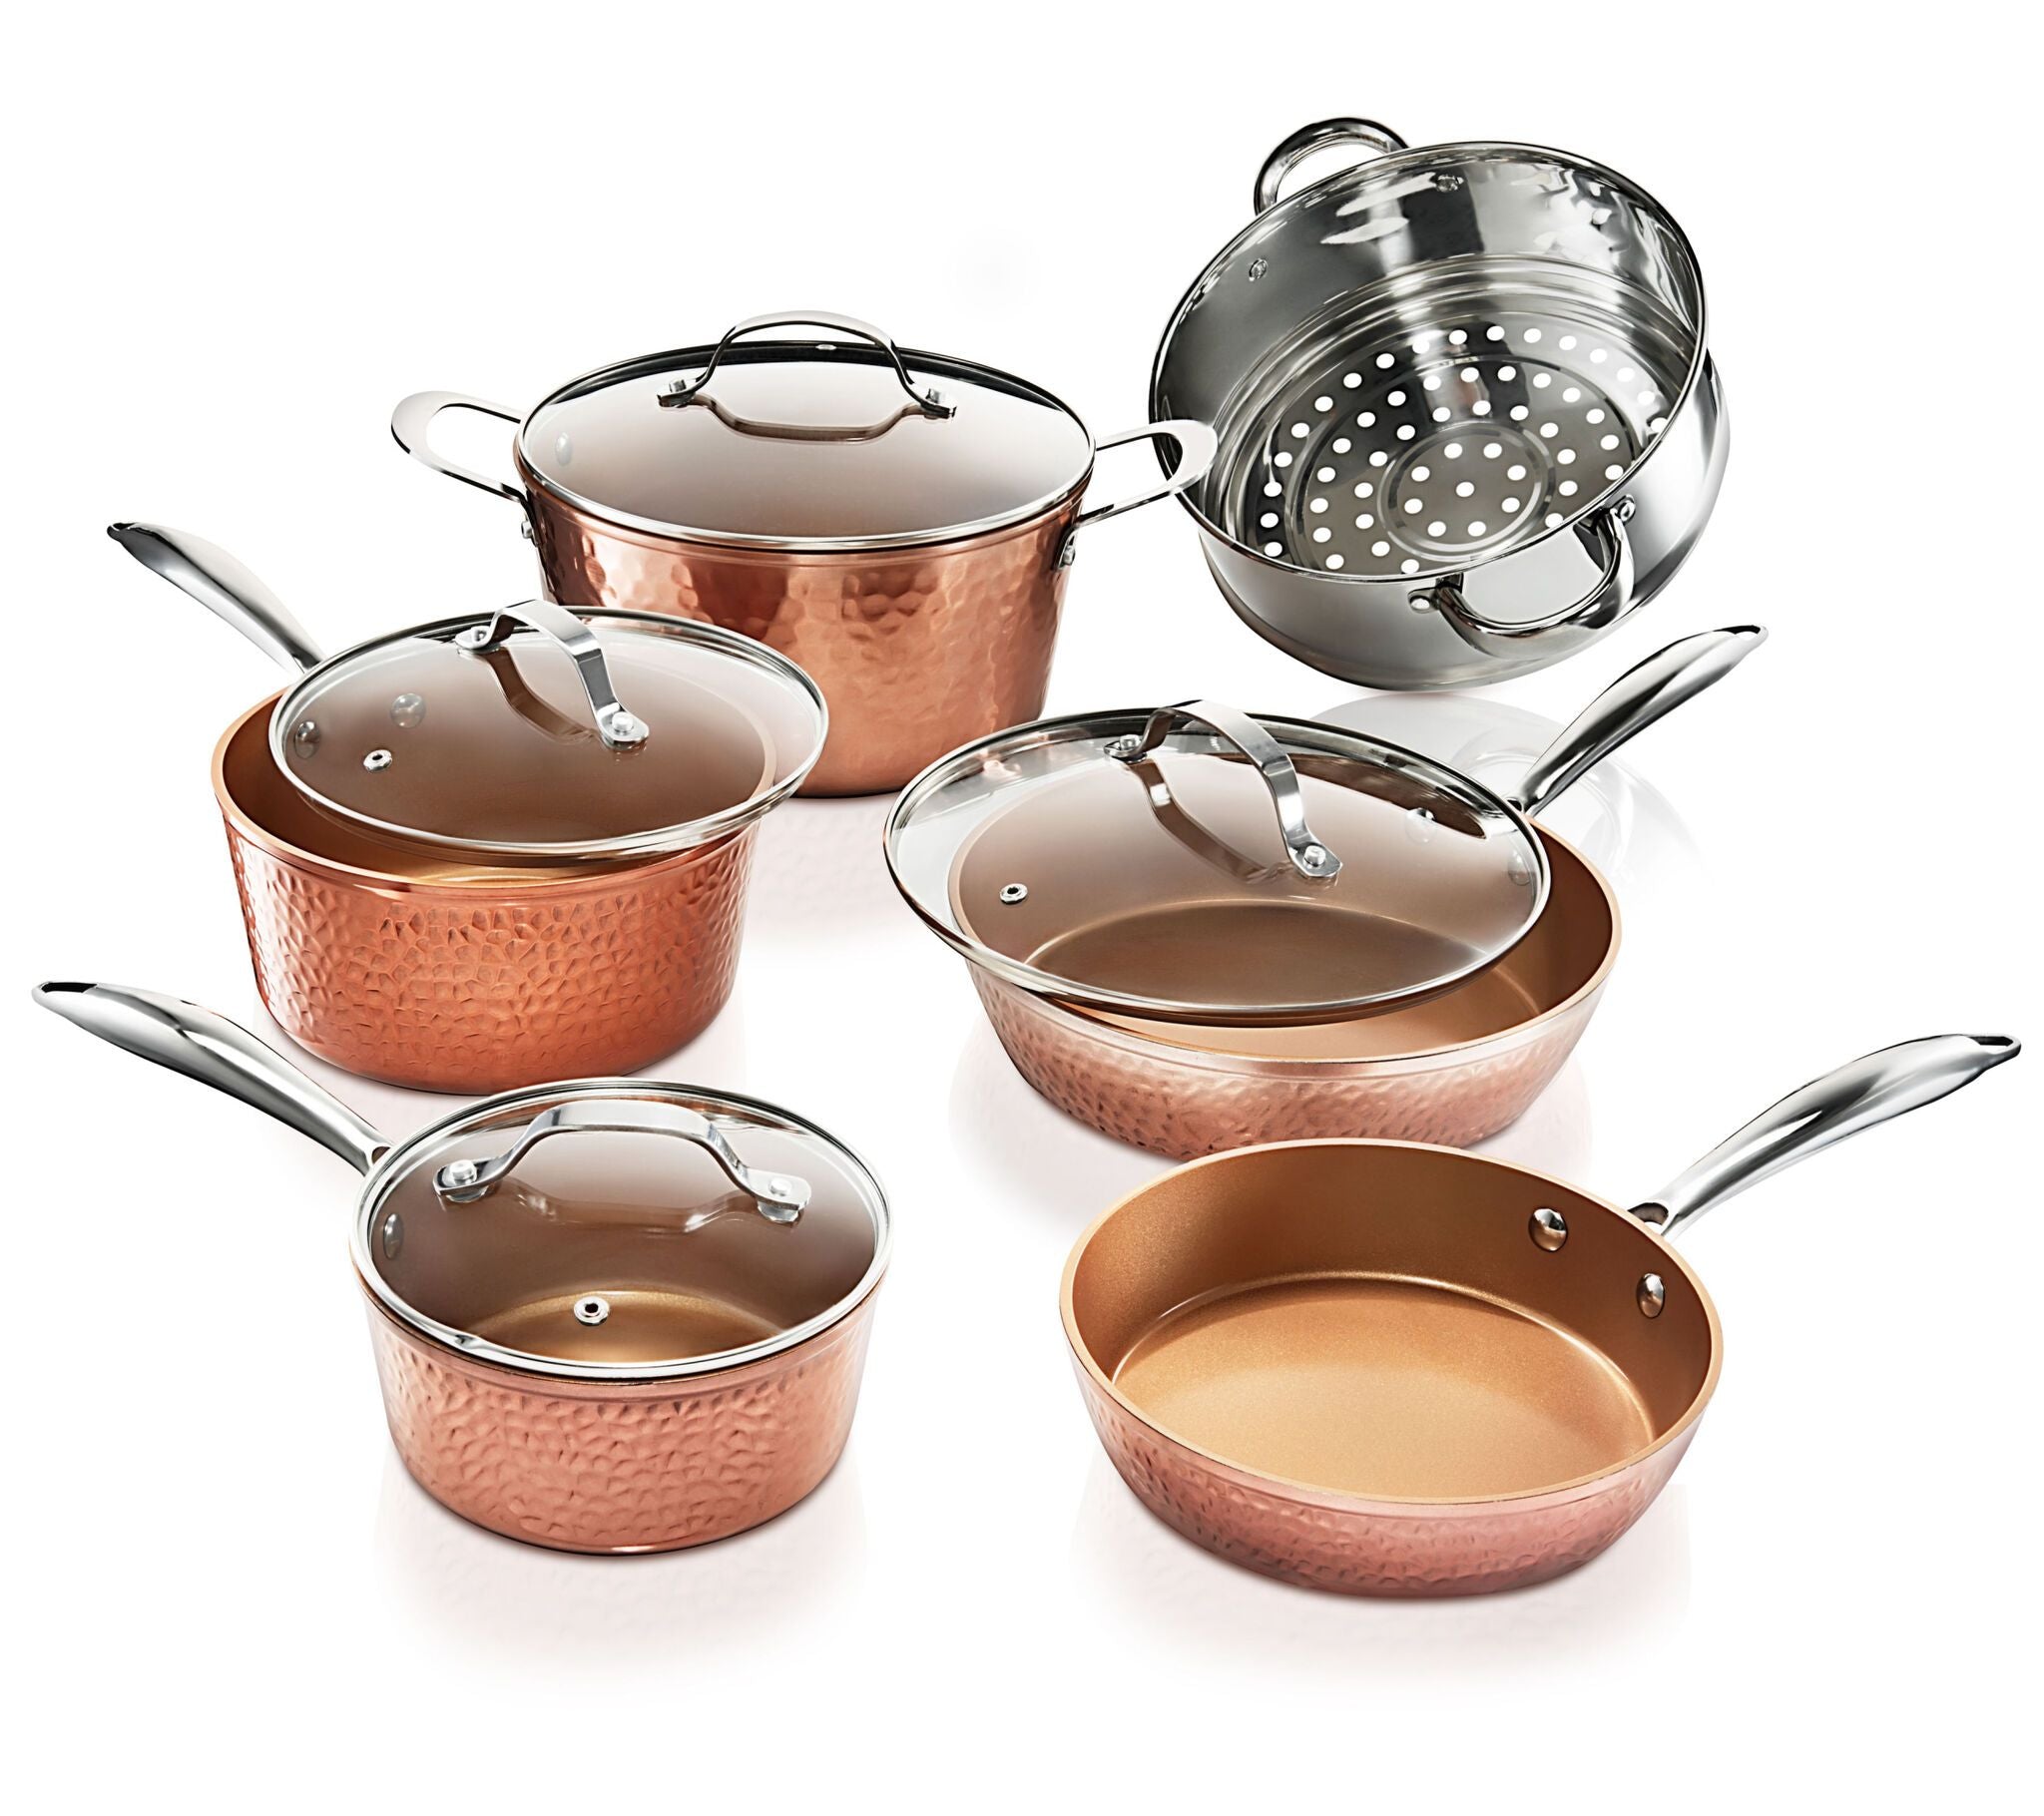 Gotham Steel 2691 Hammered 10 Piece Copper Pan Set Kitchen & Home Cooking Dining Pots Pans